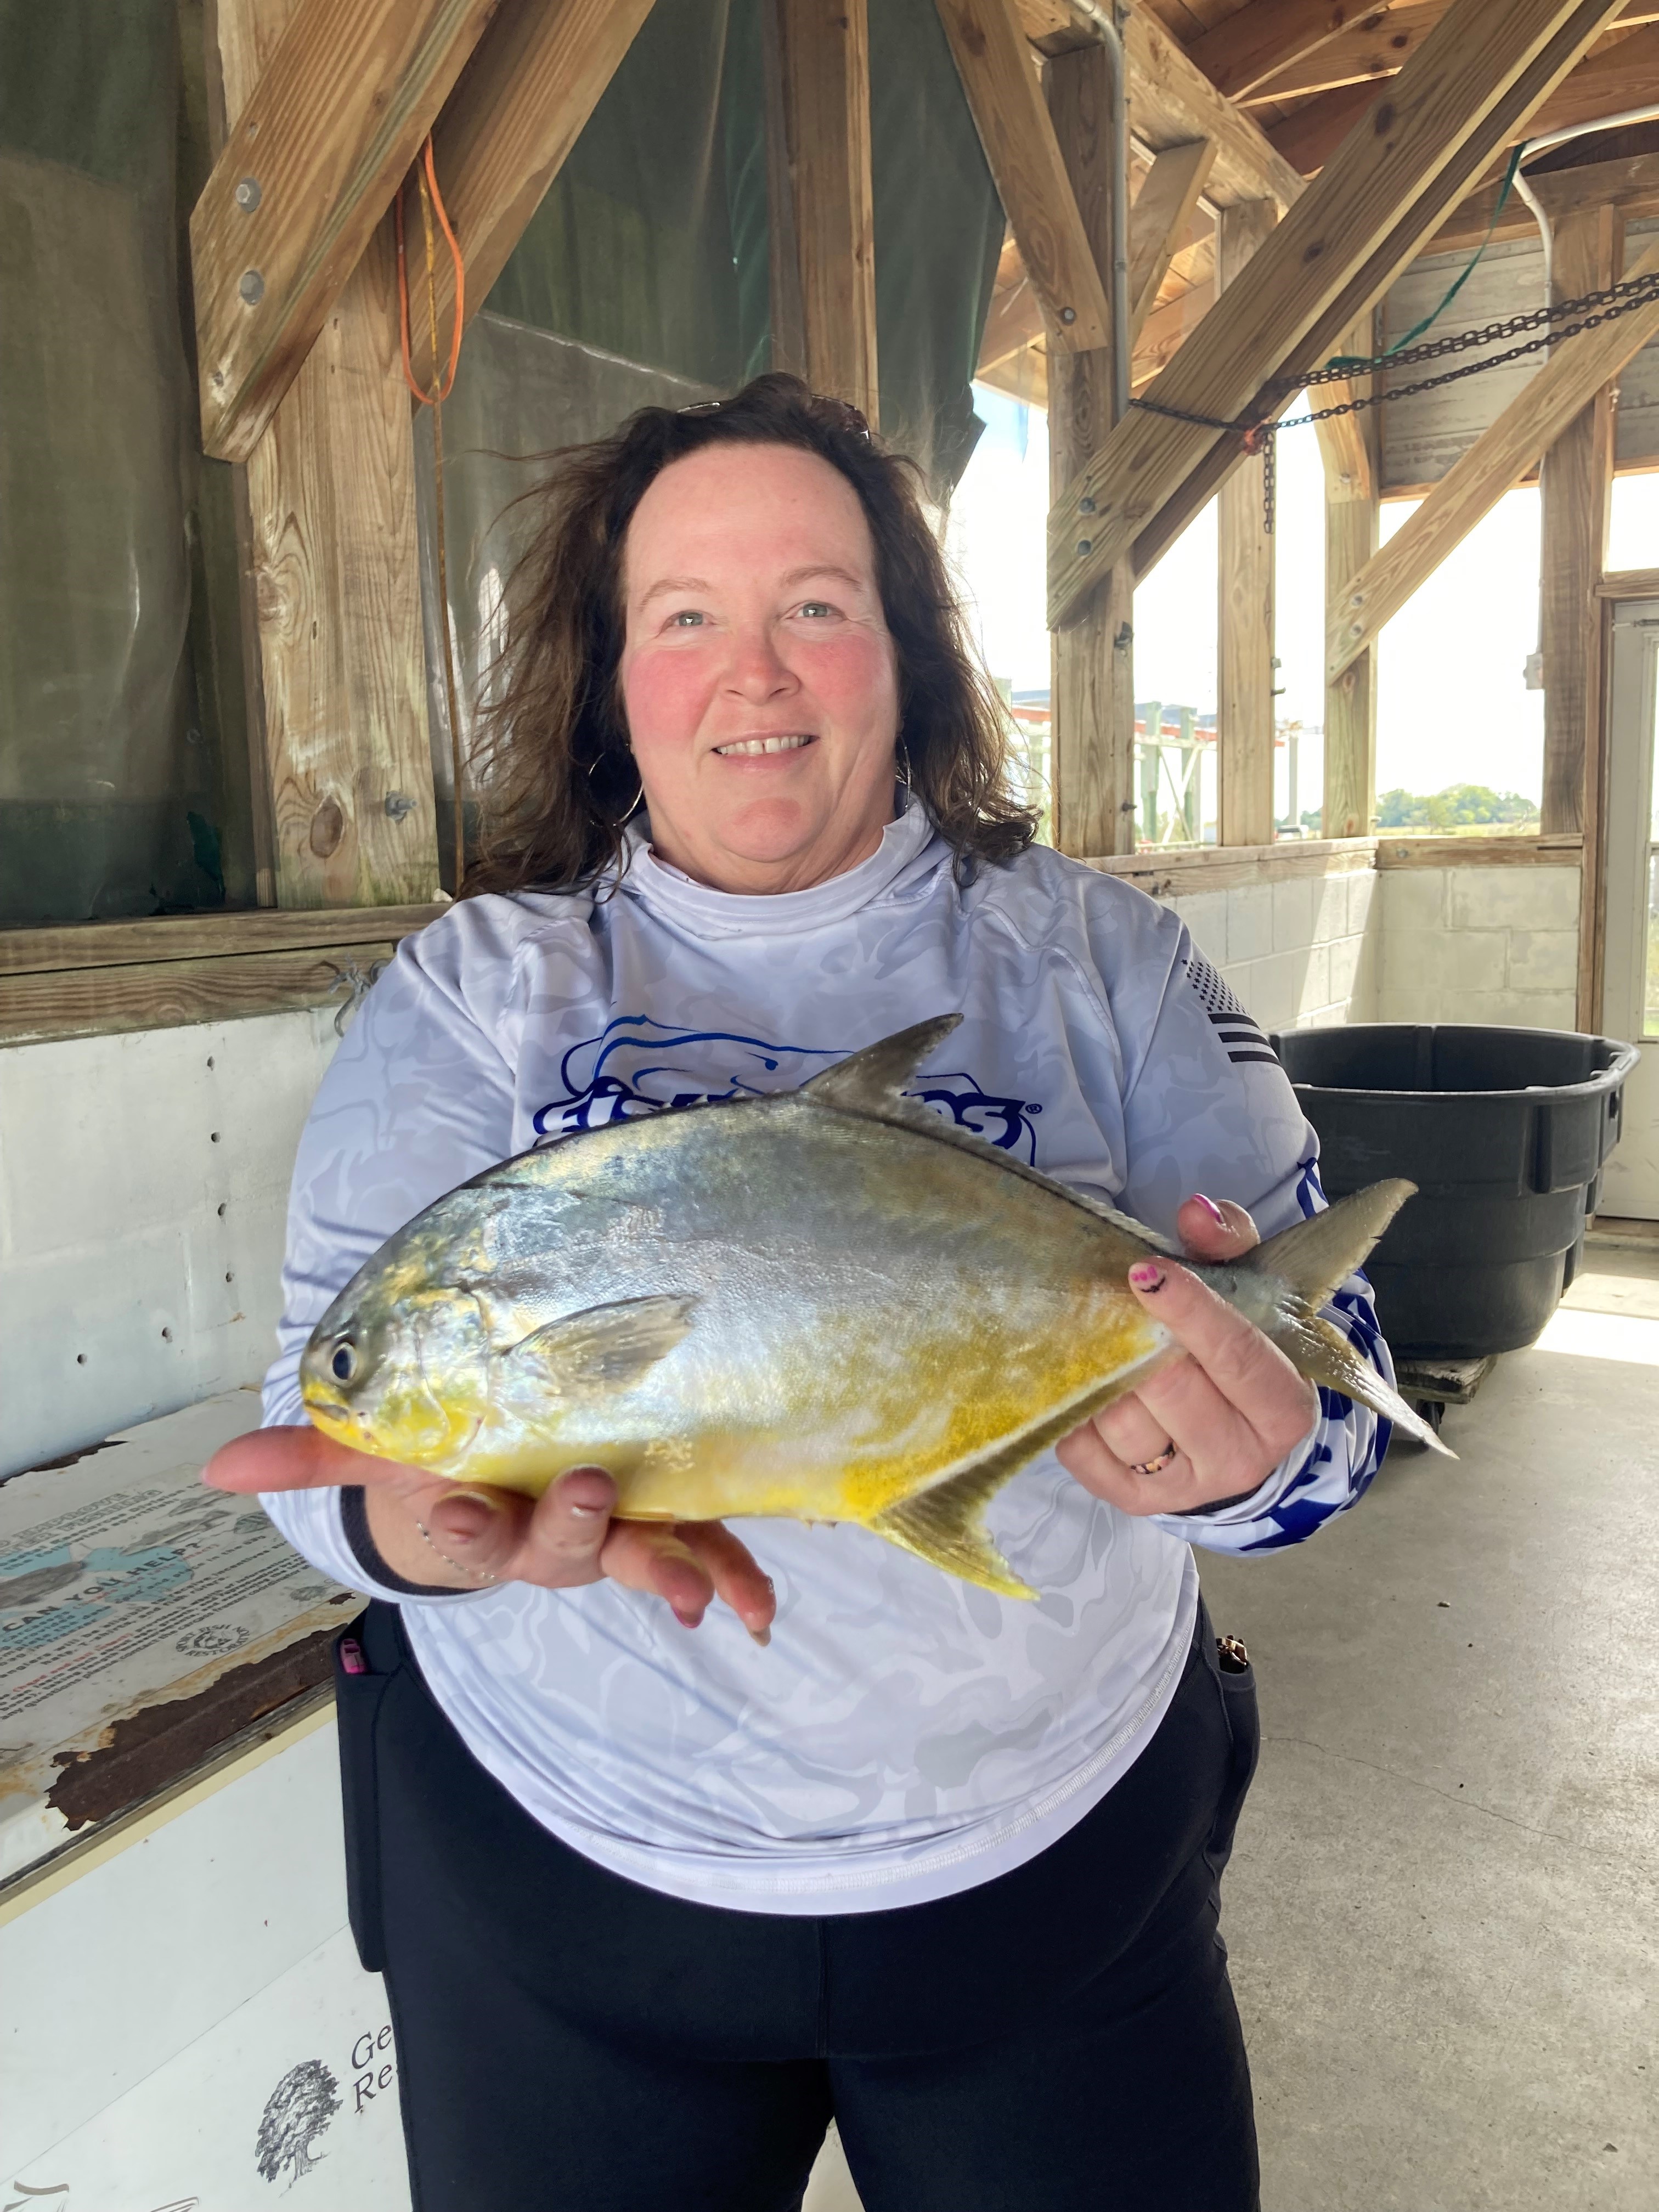 Jacksonville woman reels in new Florida pompano Georgia-state record